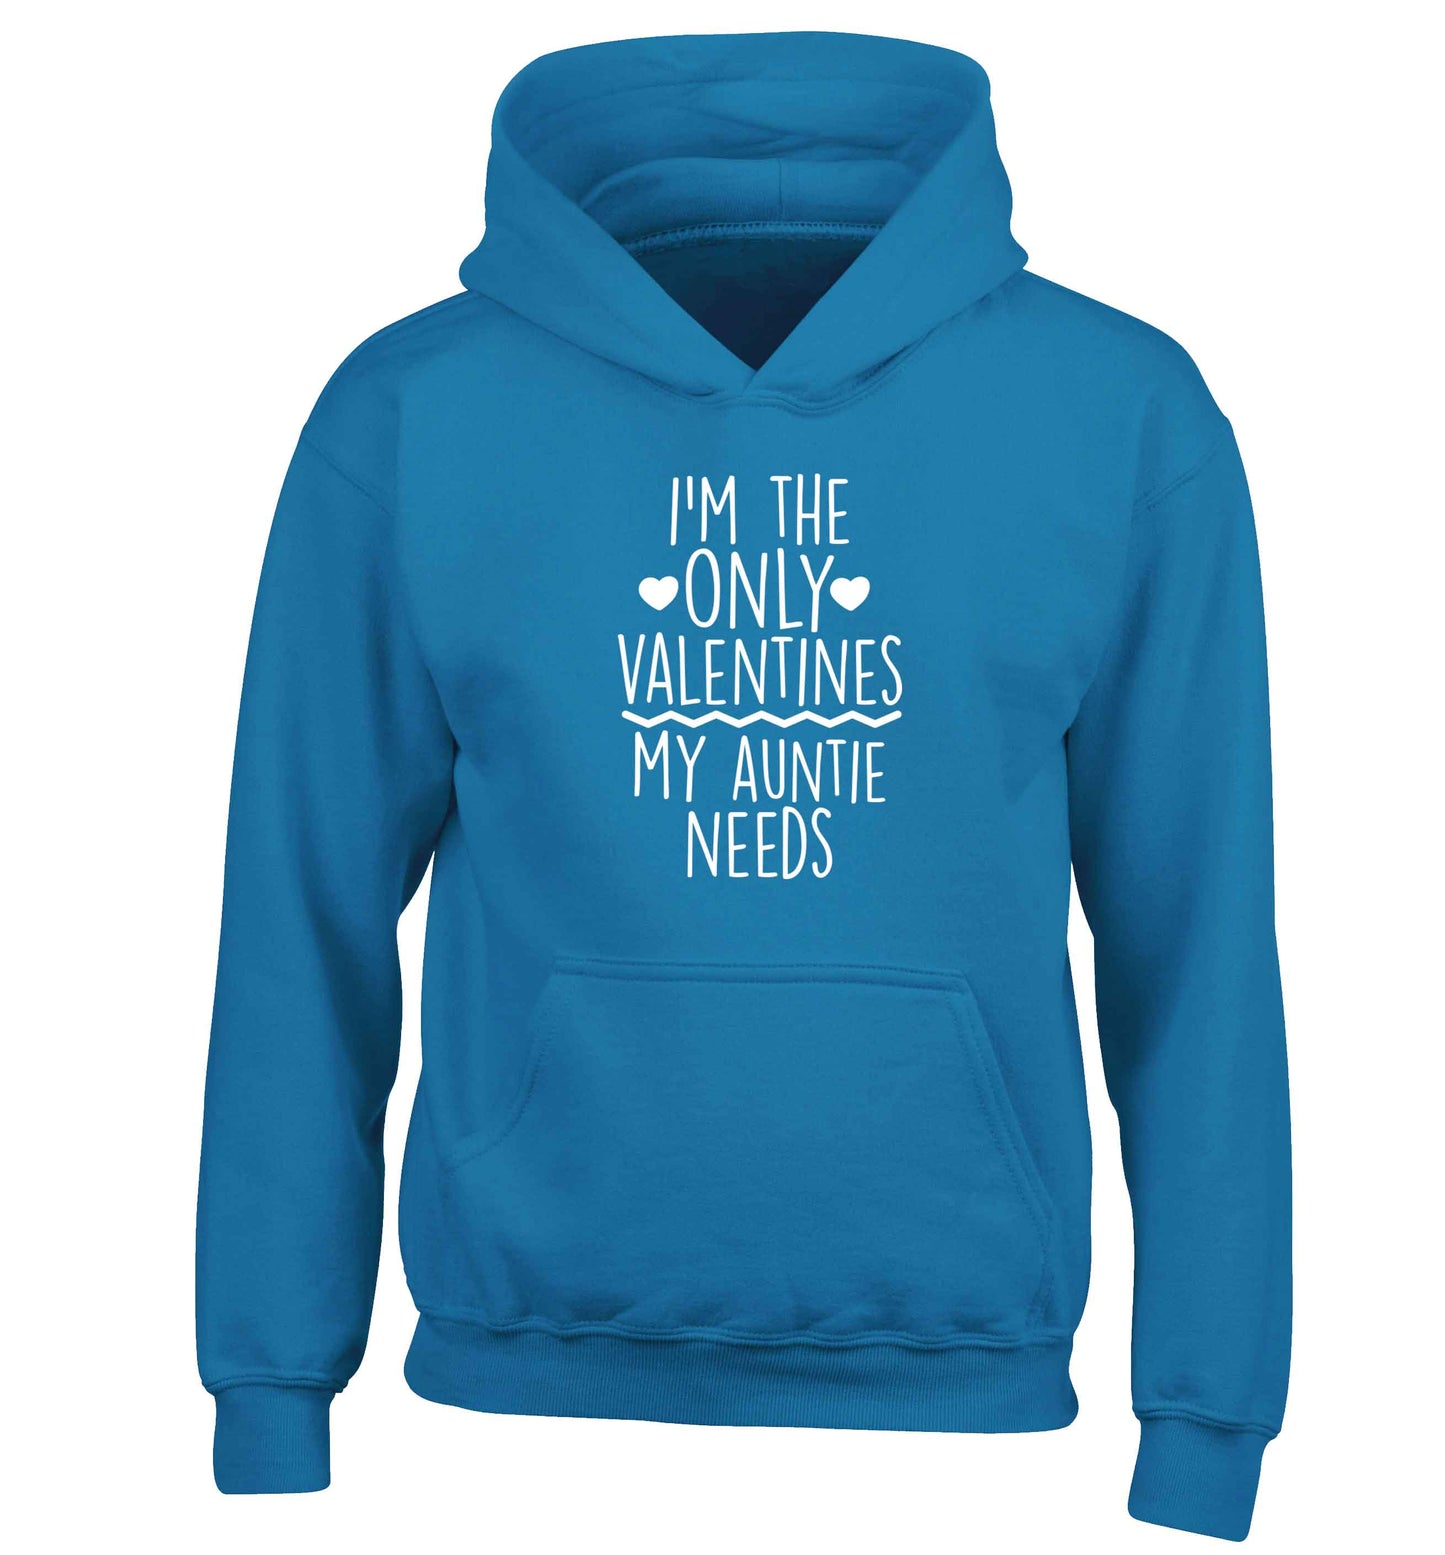 I'm the only valentines my auntie needs children's blue hoodie 12-13 Years